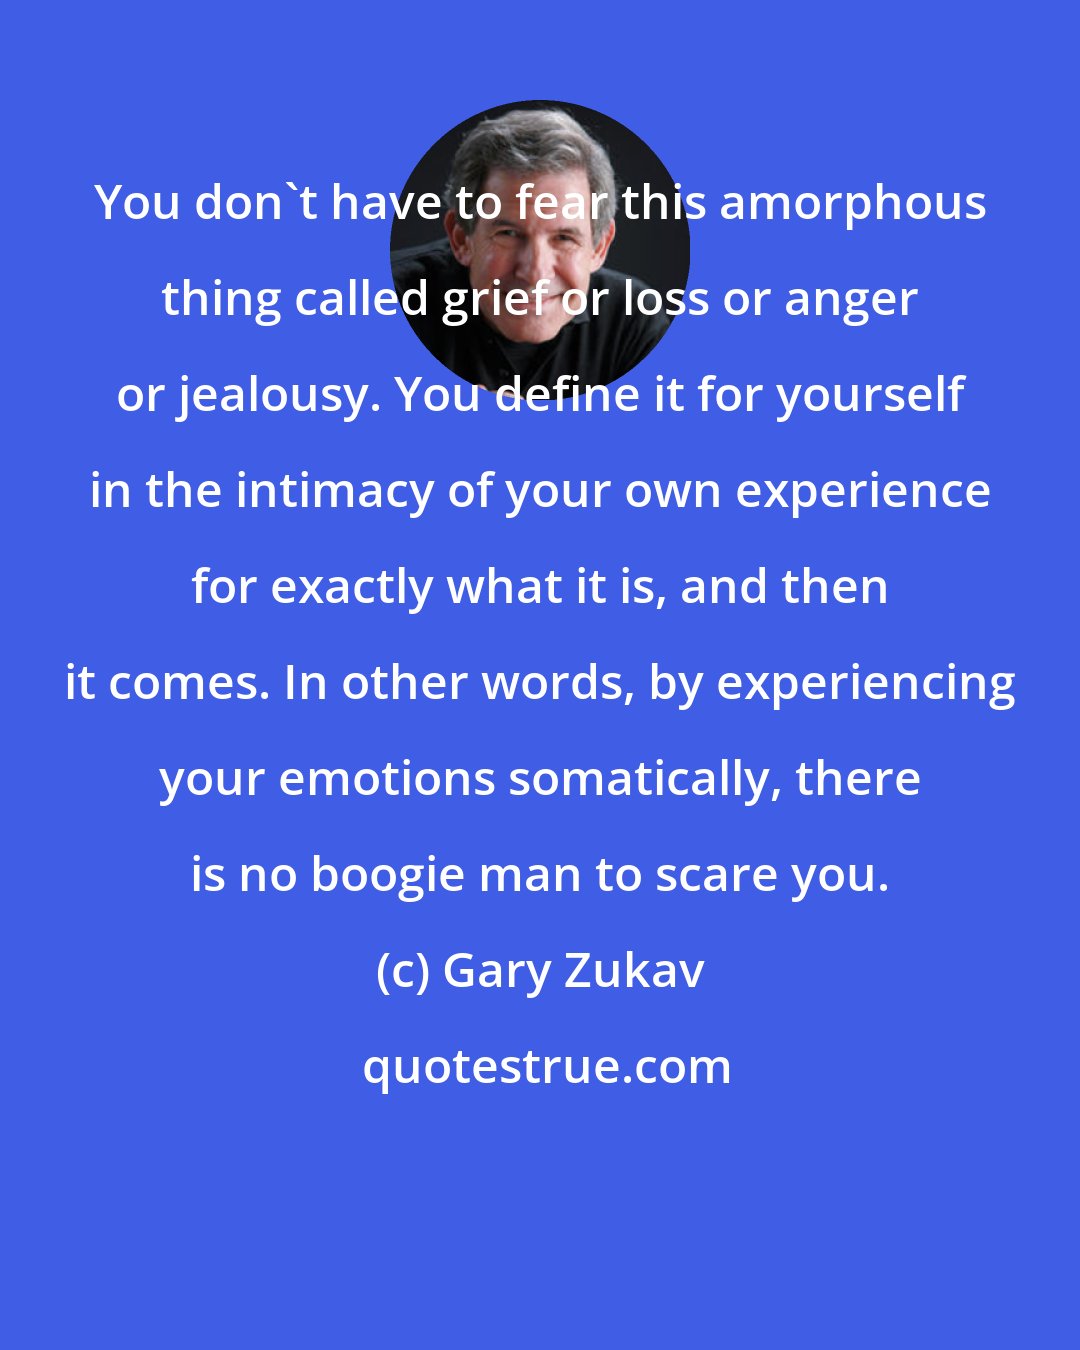 Gary Zukav: You don't have to fear this amorphous thing called grief or loss or anger or jealousy. You define it for yourself in the intimacy of your own experience for exactly what it is, and then it comes. In other words, by experiencing your emotions somatically, there is no boogie man to scare you.